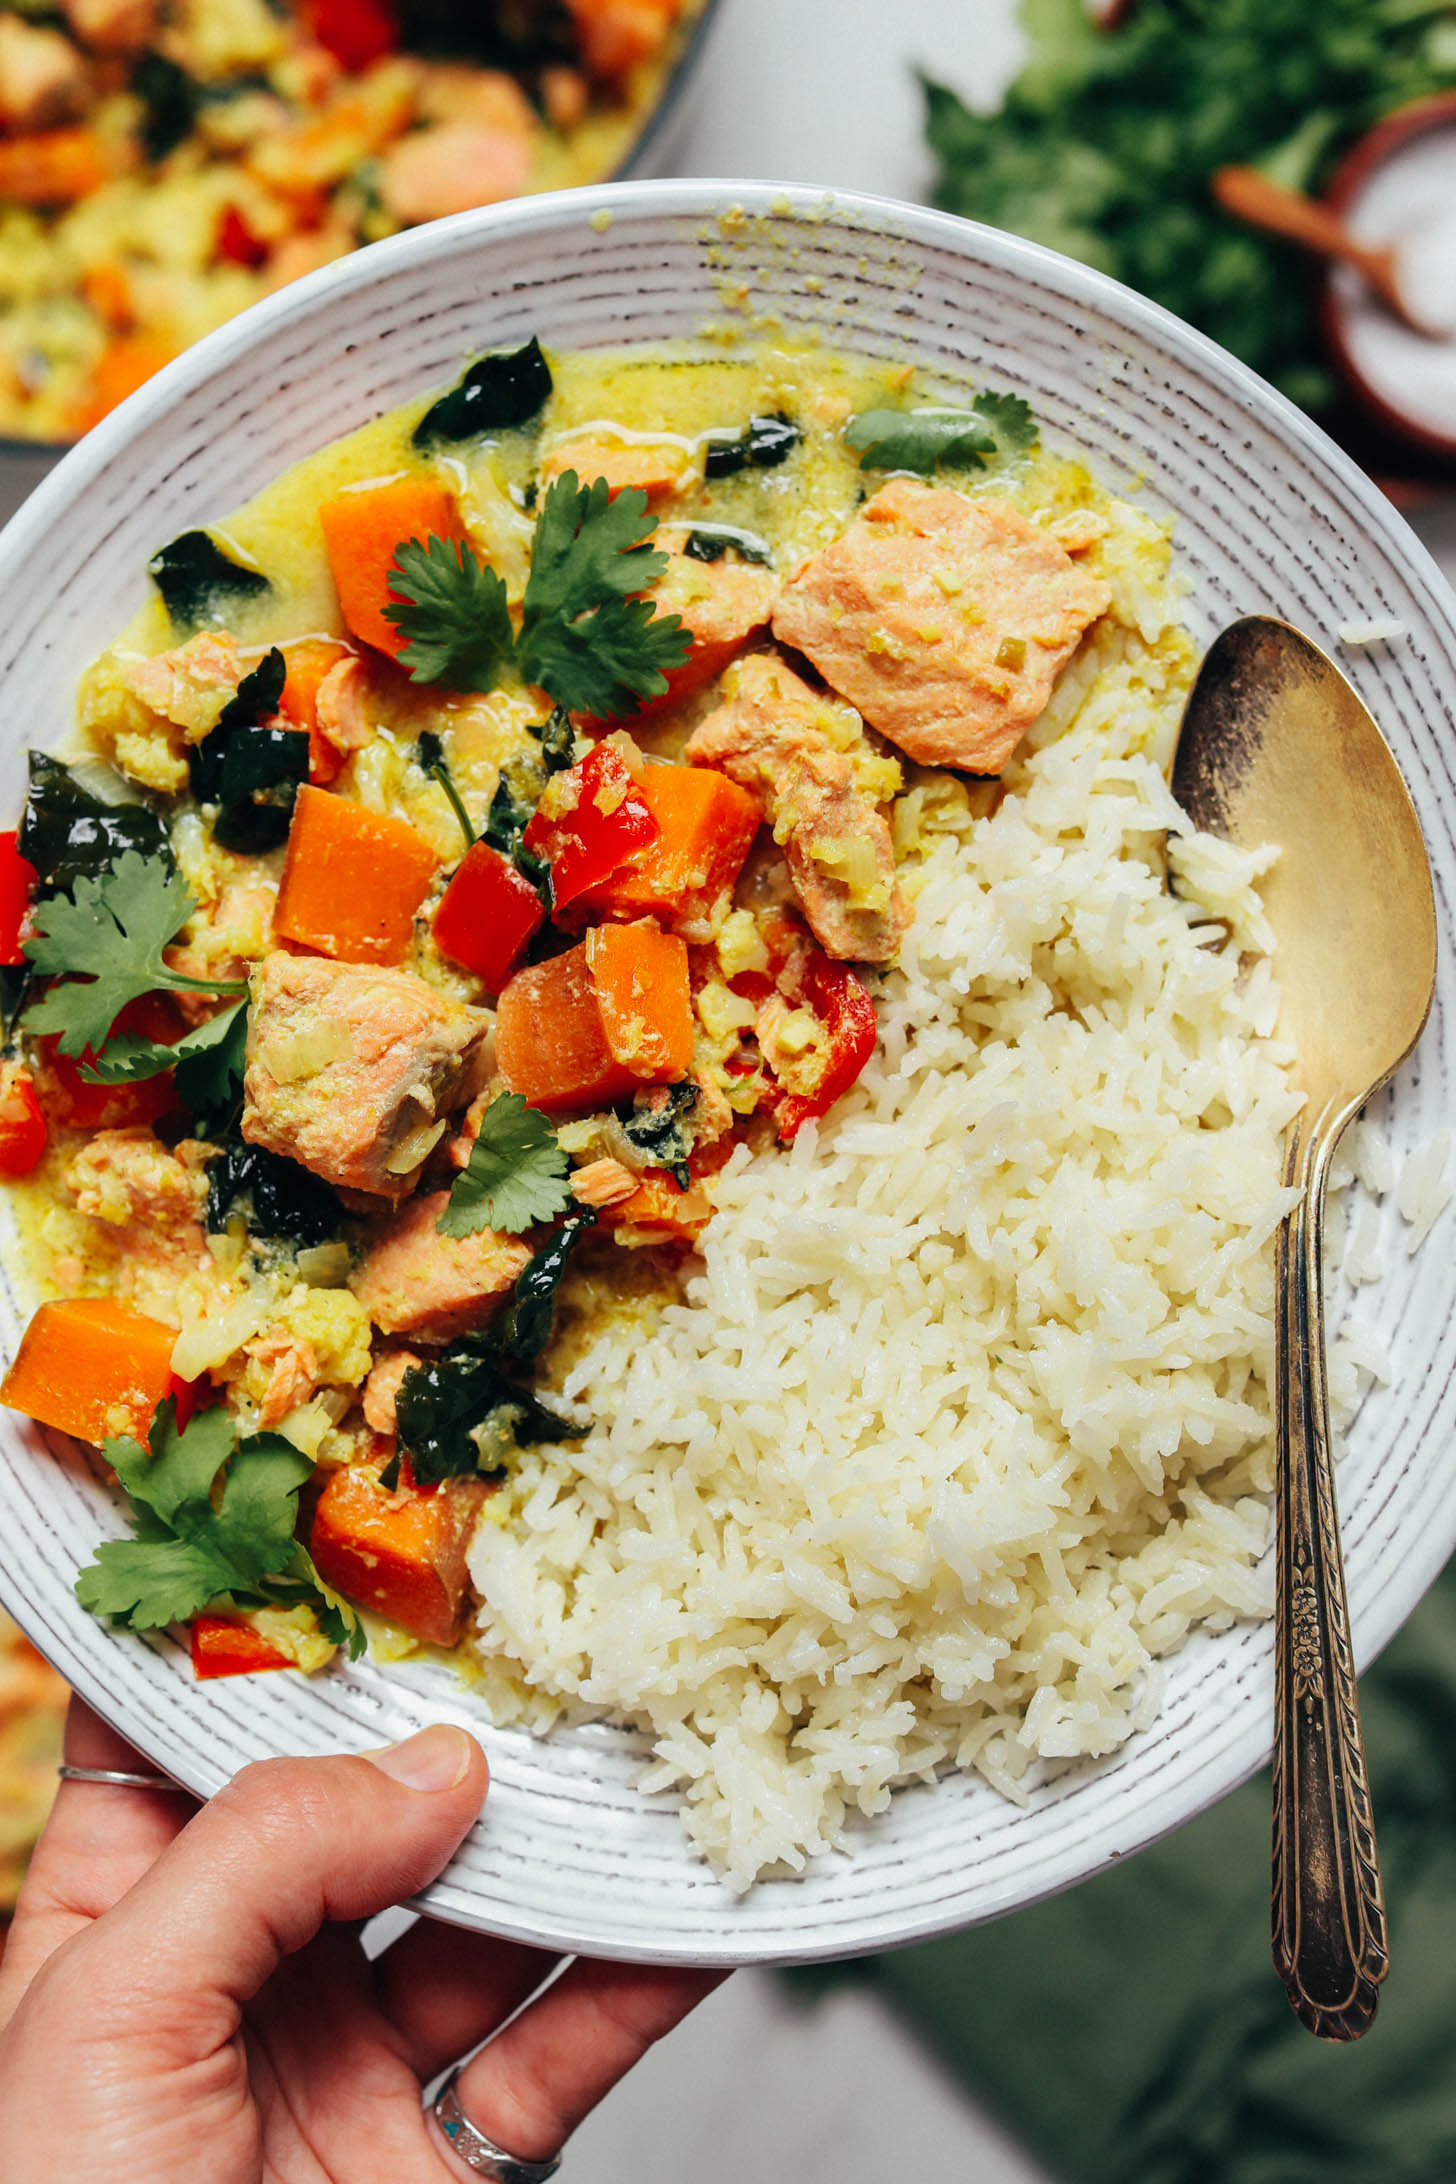 Close up photo of a bowl of white rice and salmon green curry with vegetables